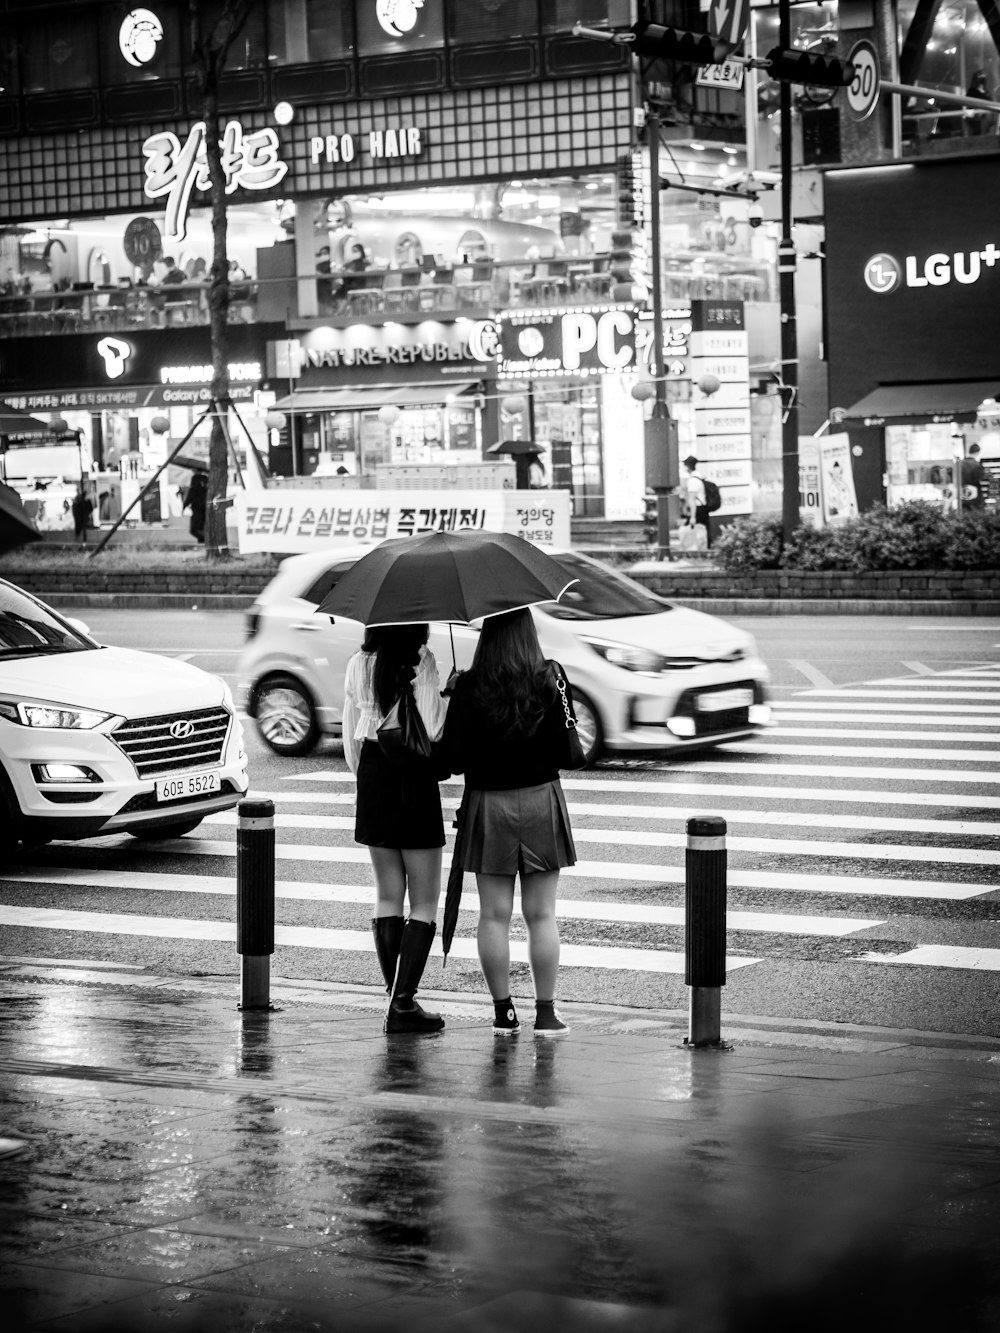 grayscale photo of man and woman holding umbrella walking on pedestrian lane